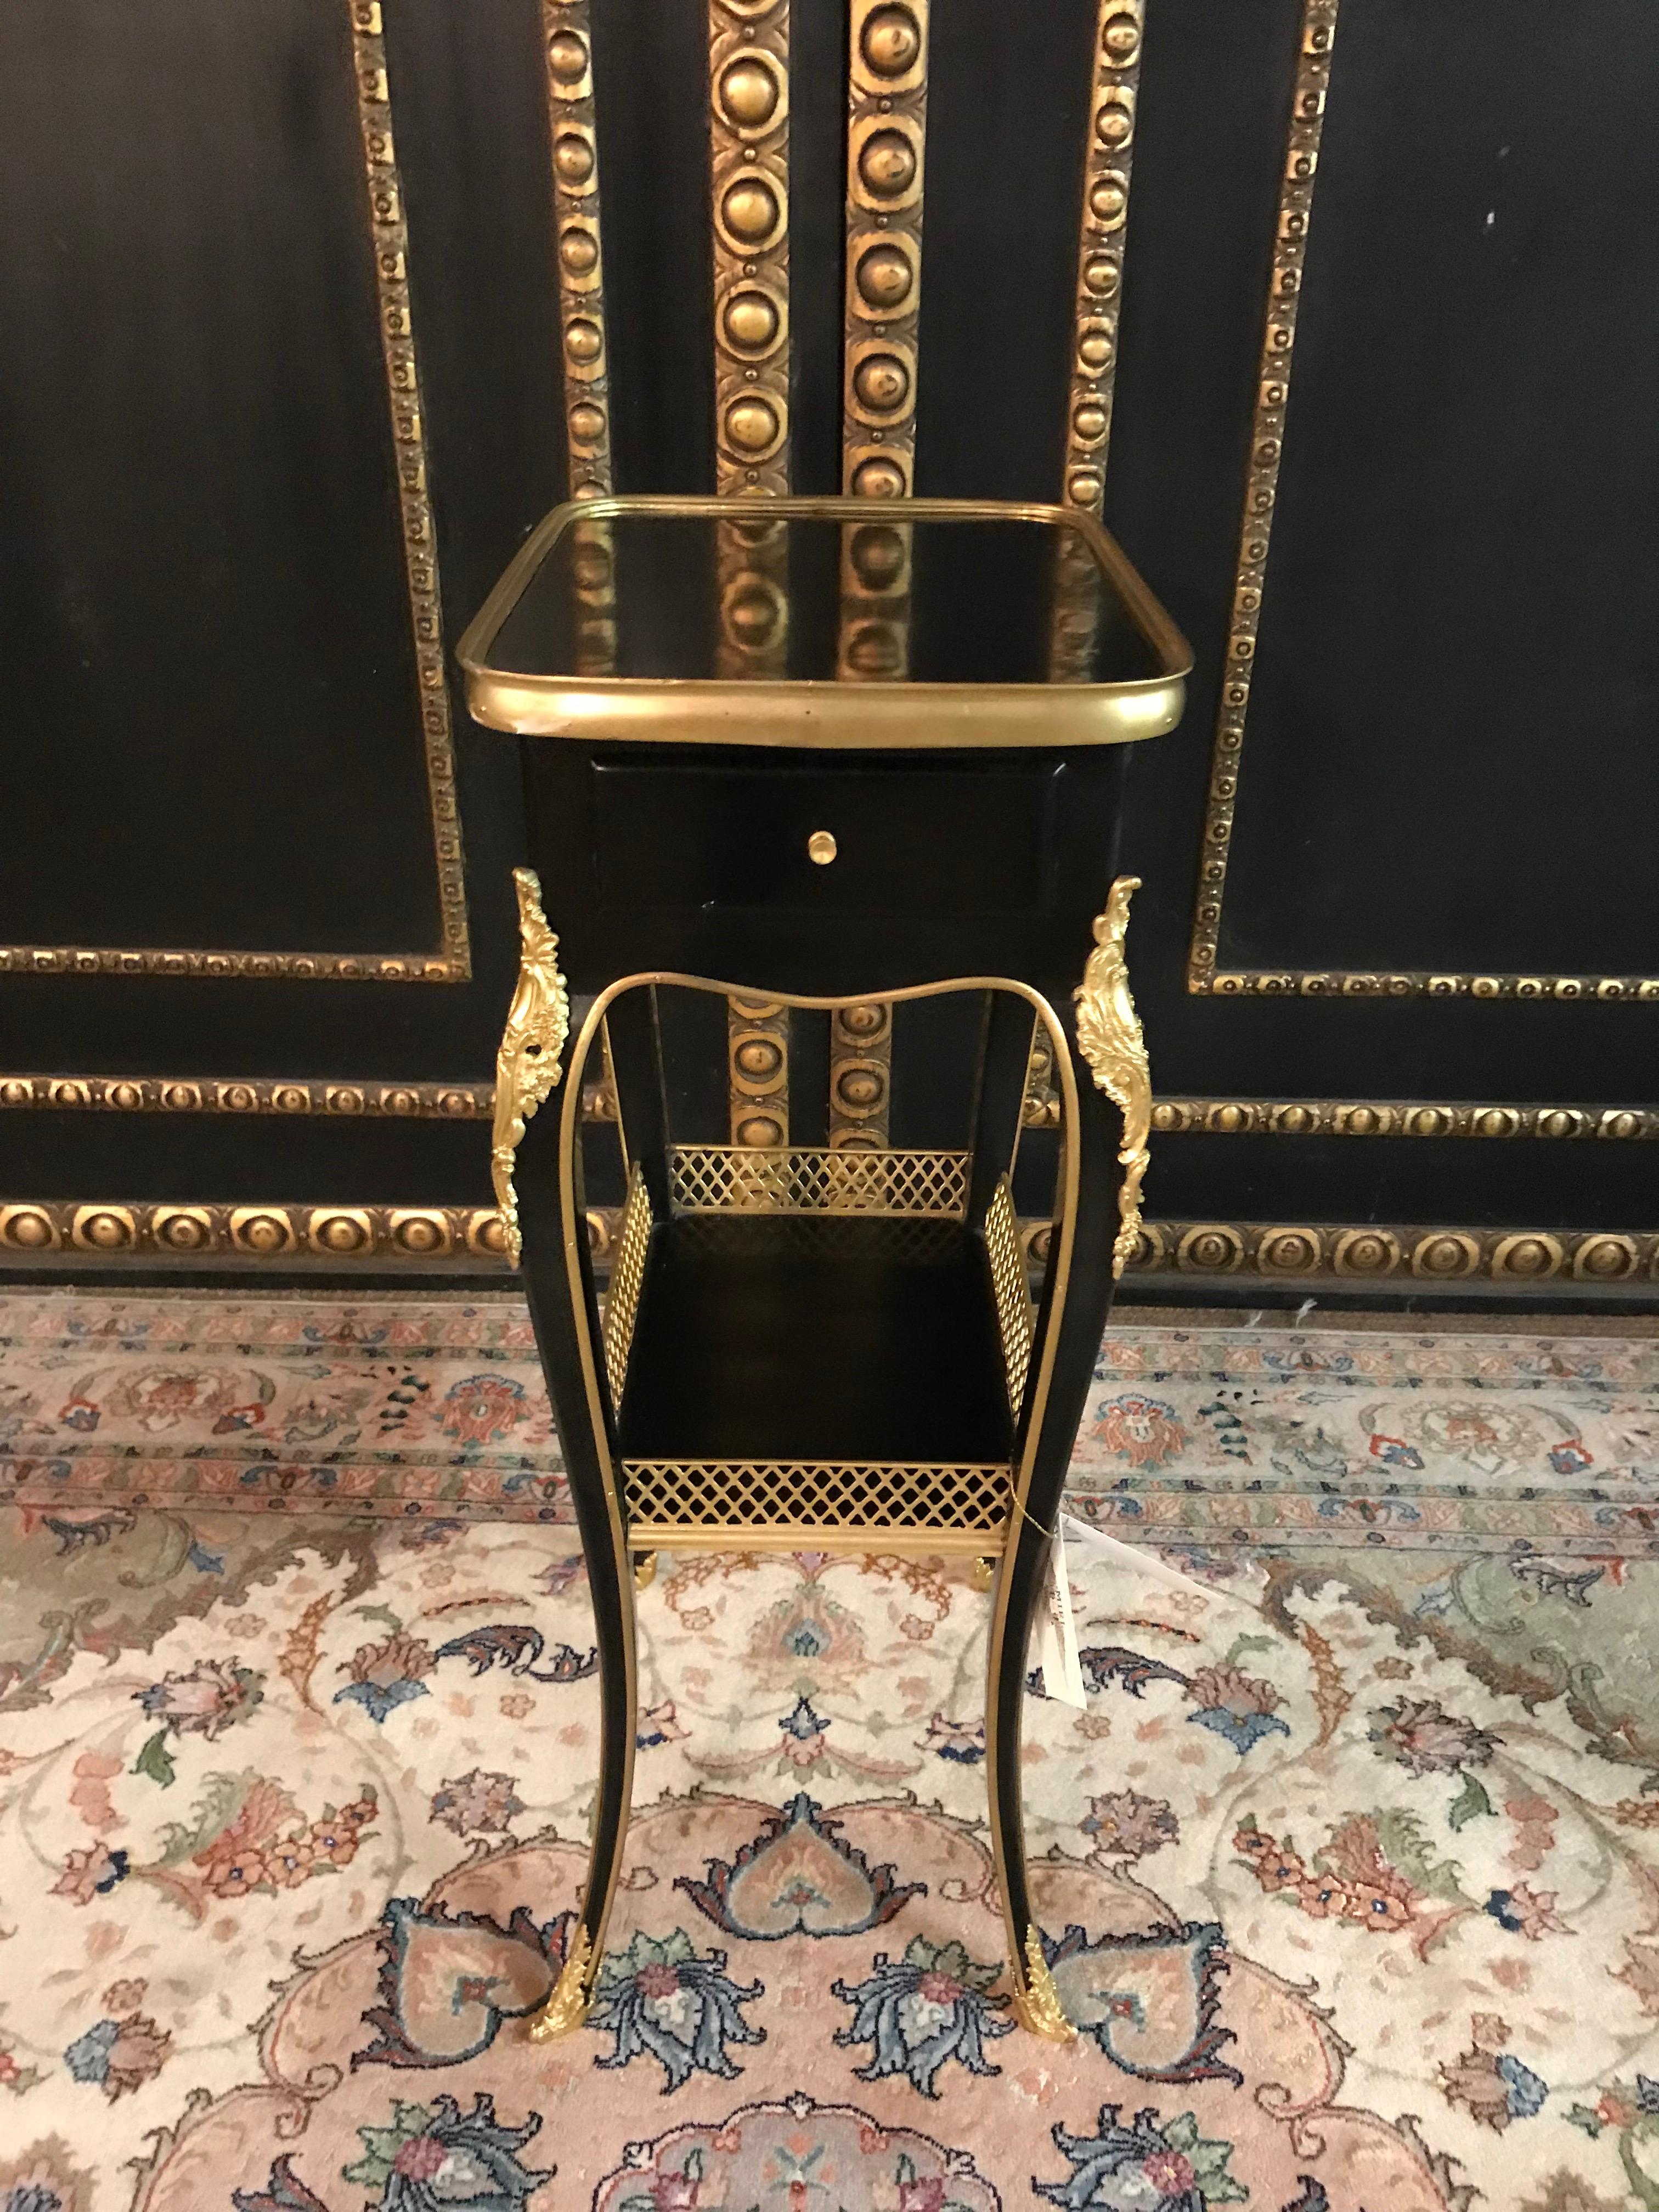 Polished Filigree Side Table in Louis Seize Style after Henry Dasson, Paris